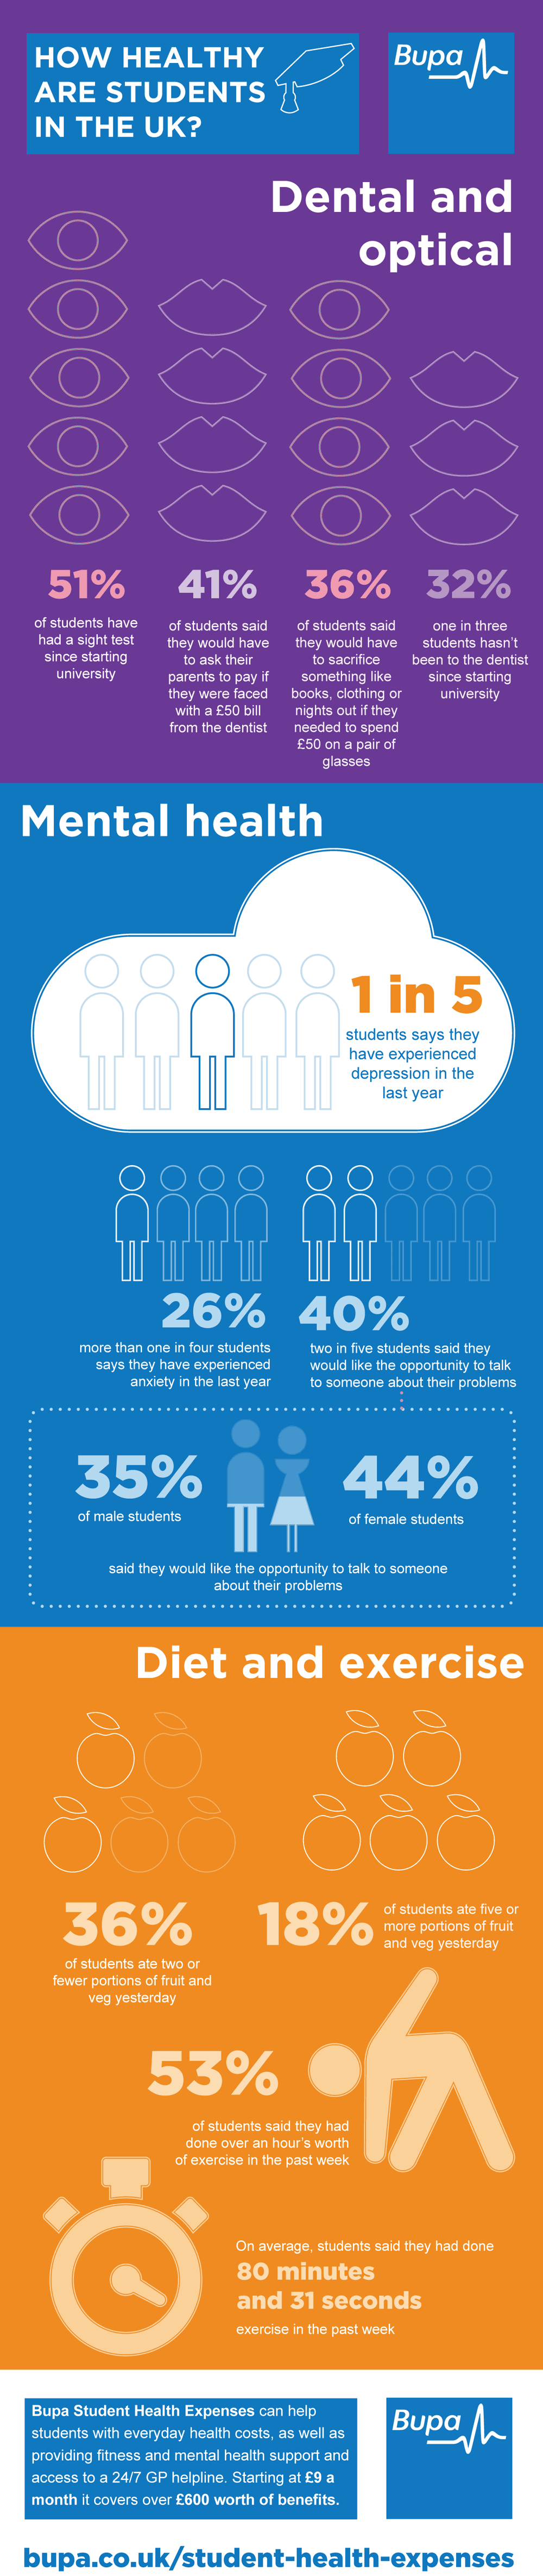 How Healthy are Students in the UK? Infographic